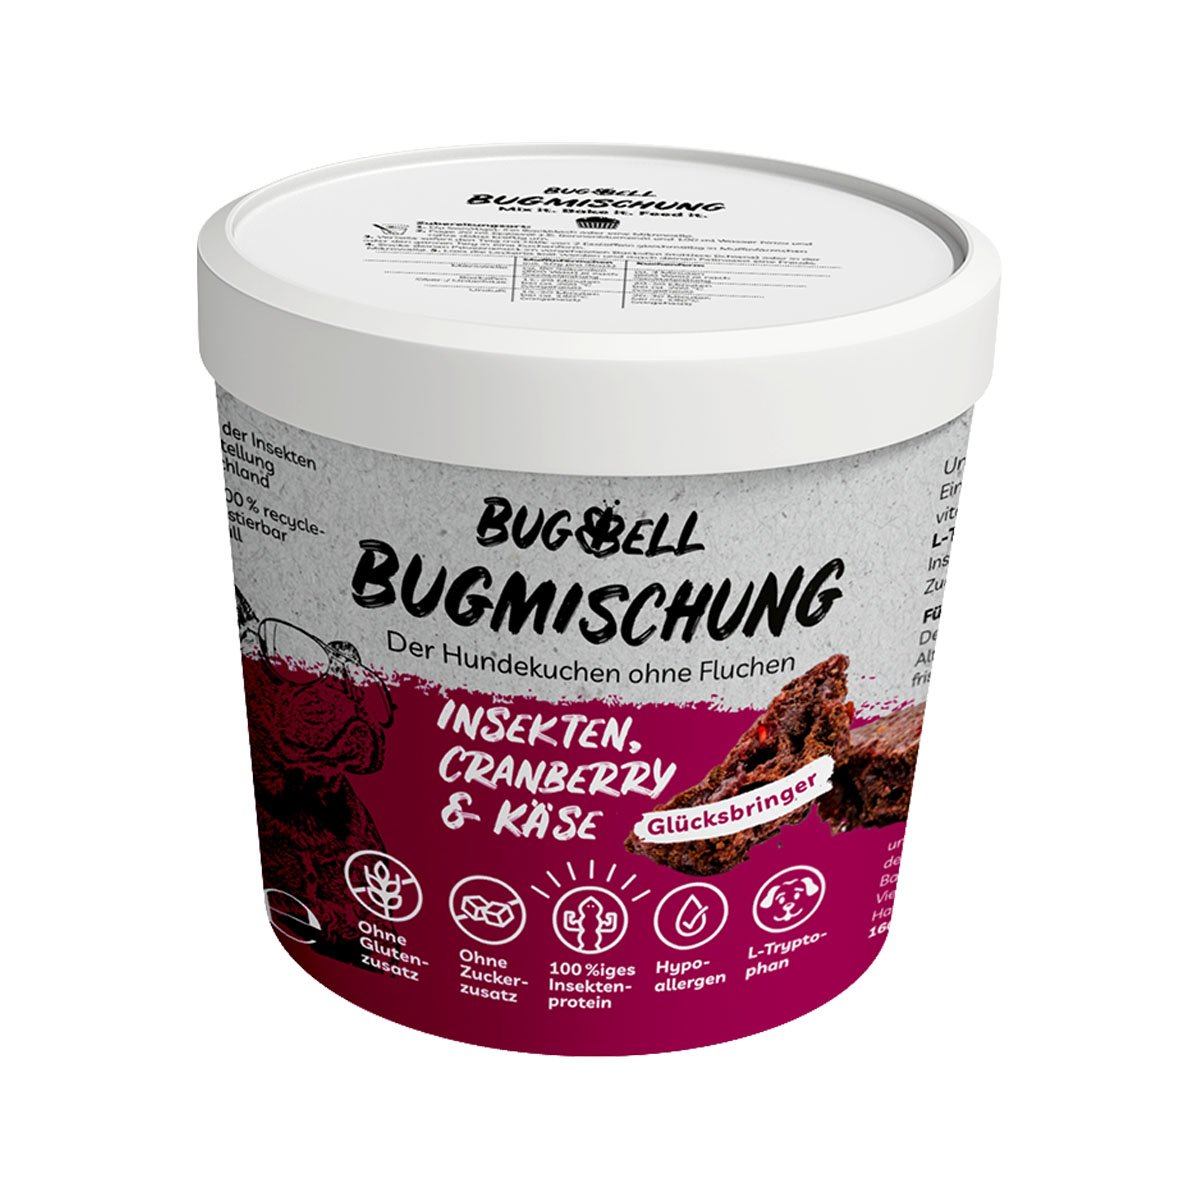 BugMischung Adult rot Cranberry & Käse 8x100g von BugBell